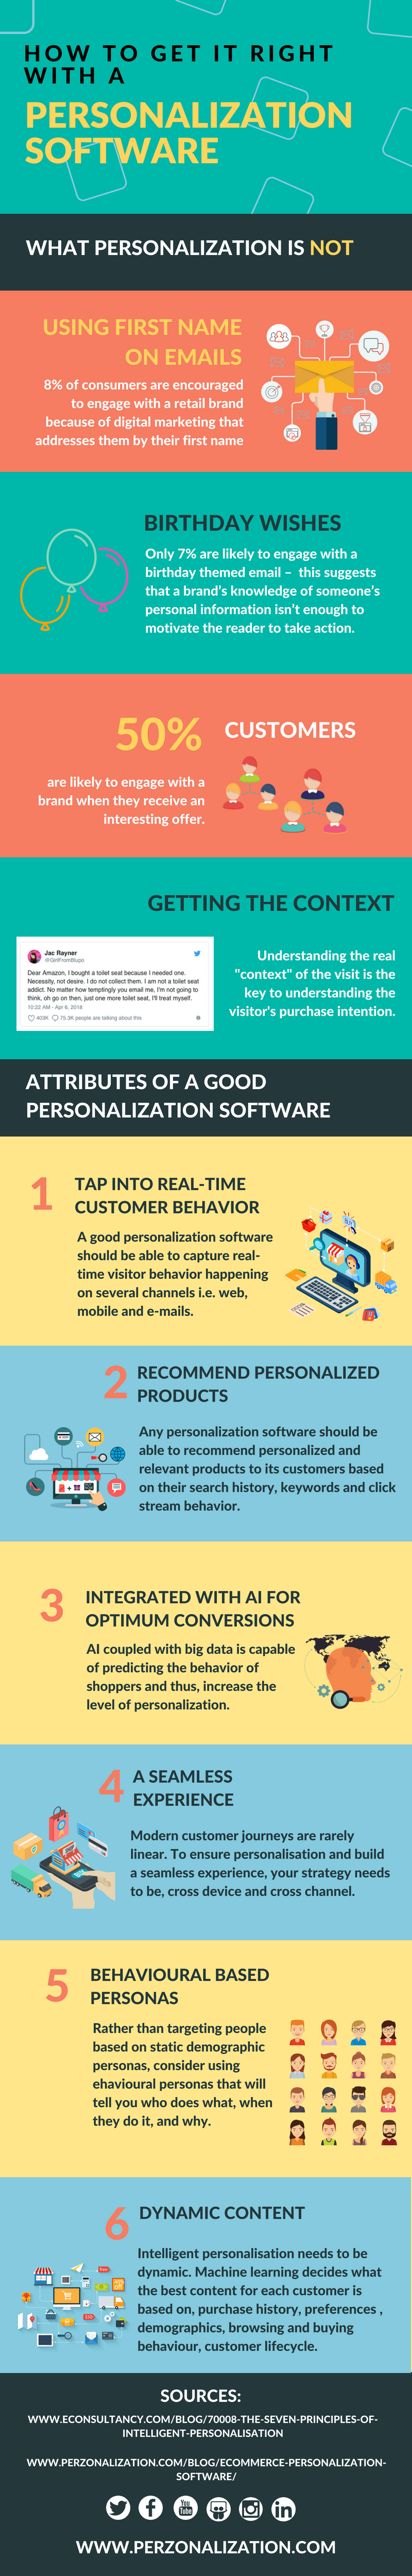 What Is A Personalization Software And Why Do You Need It?